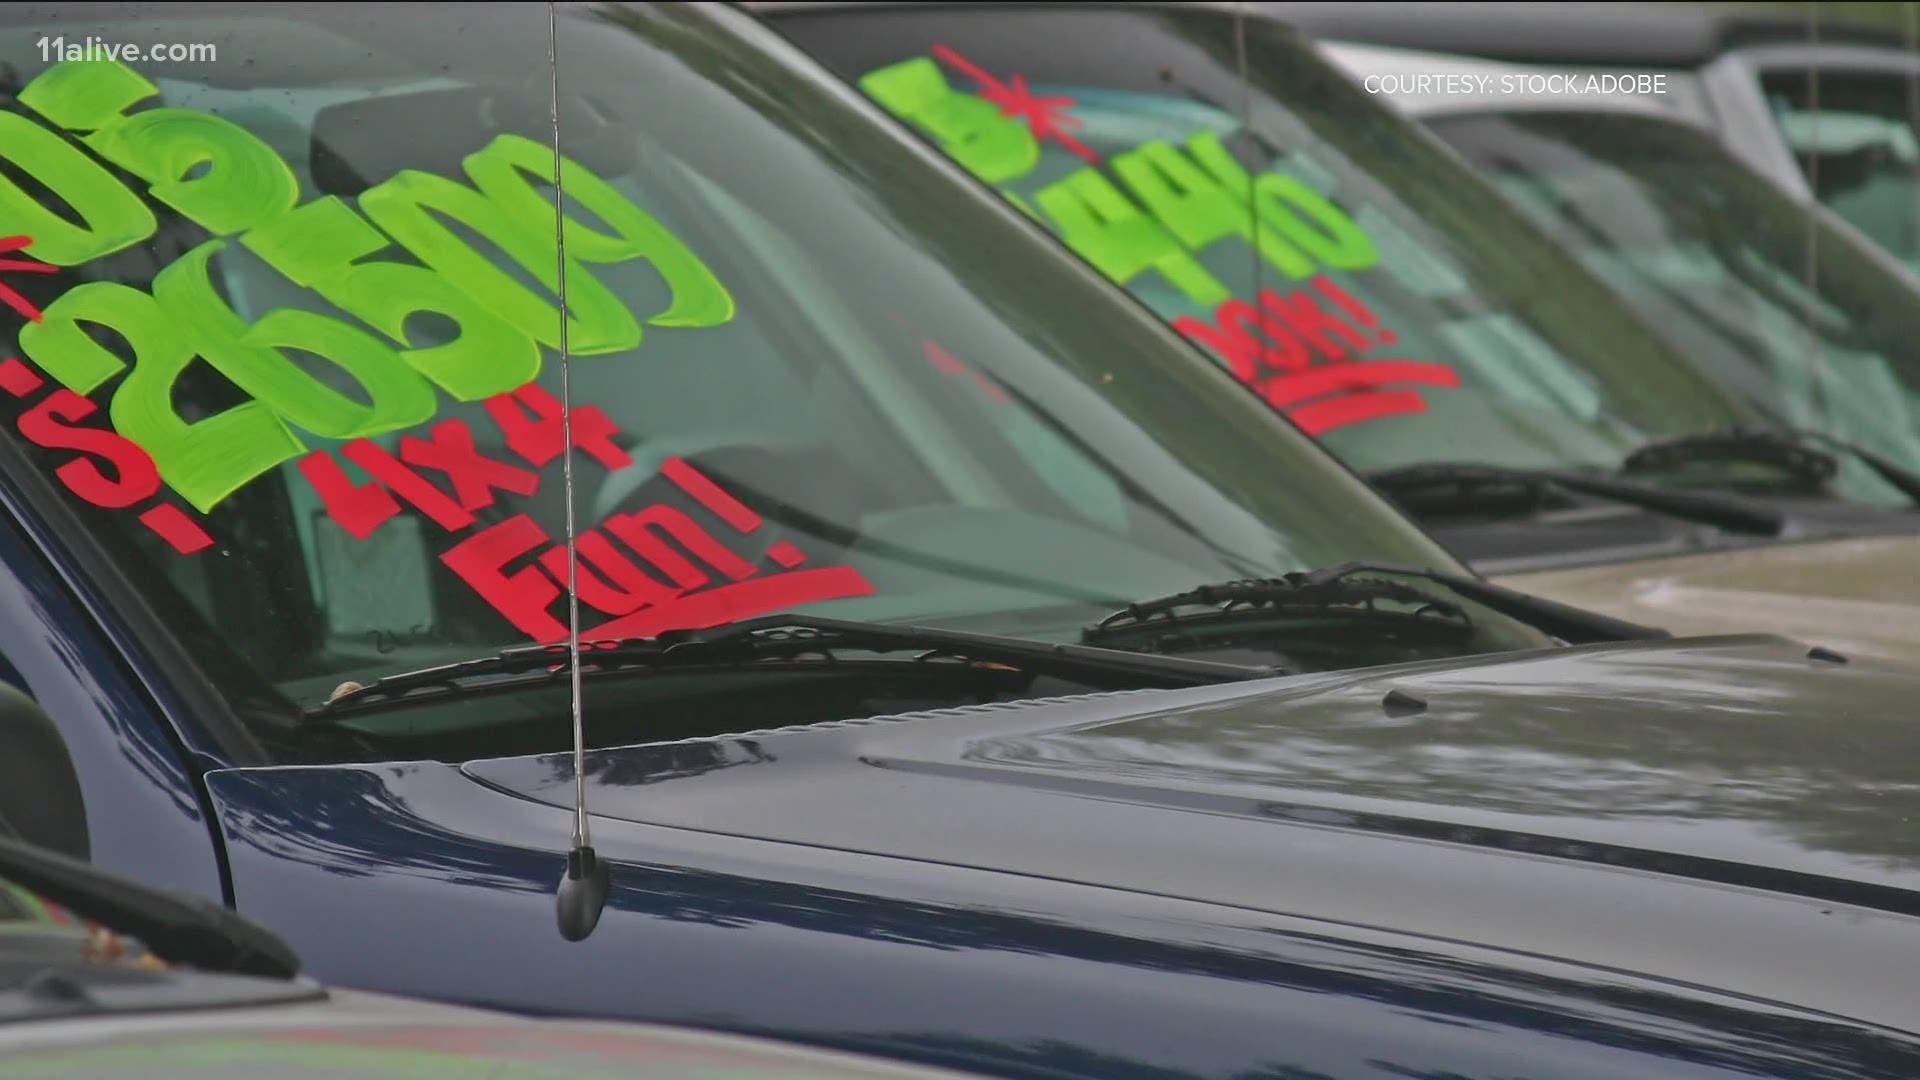 The demand for used cars, along with a chip shortage for new cars, has driven prices up.